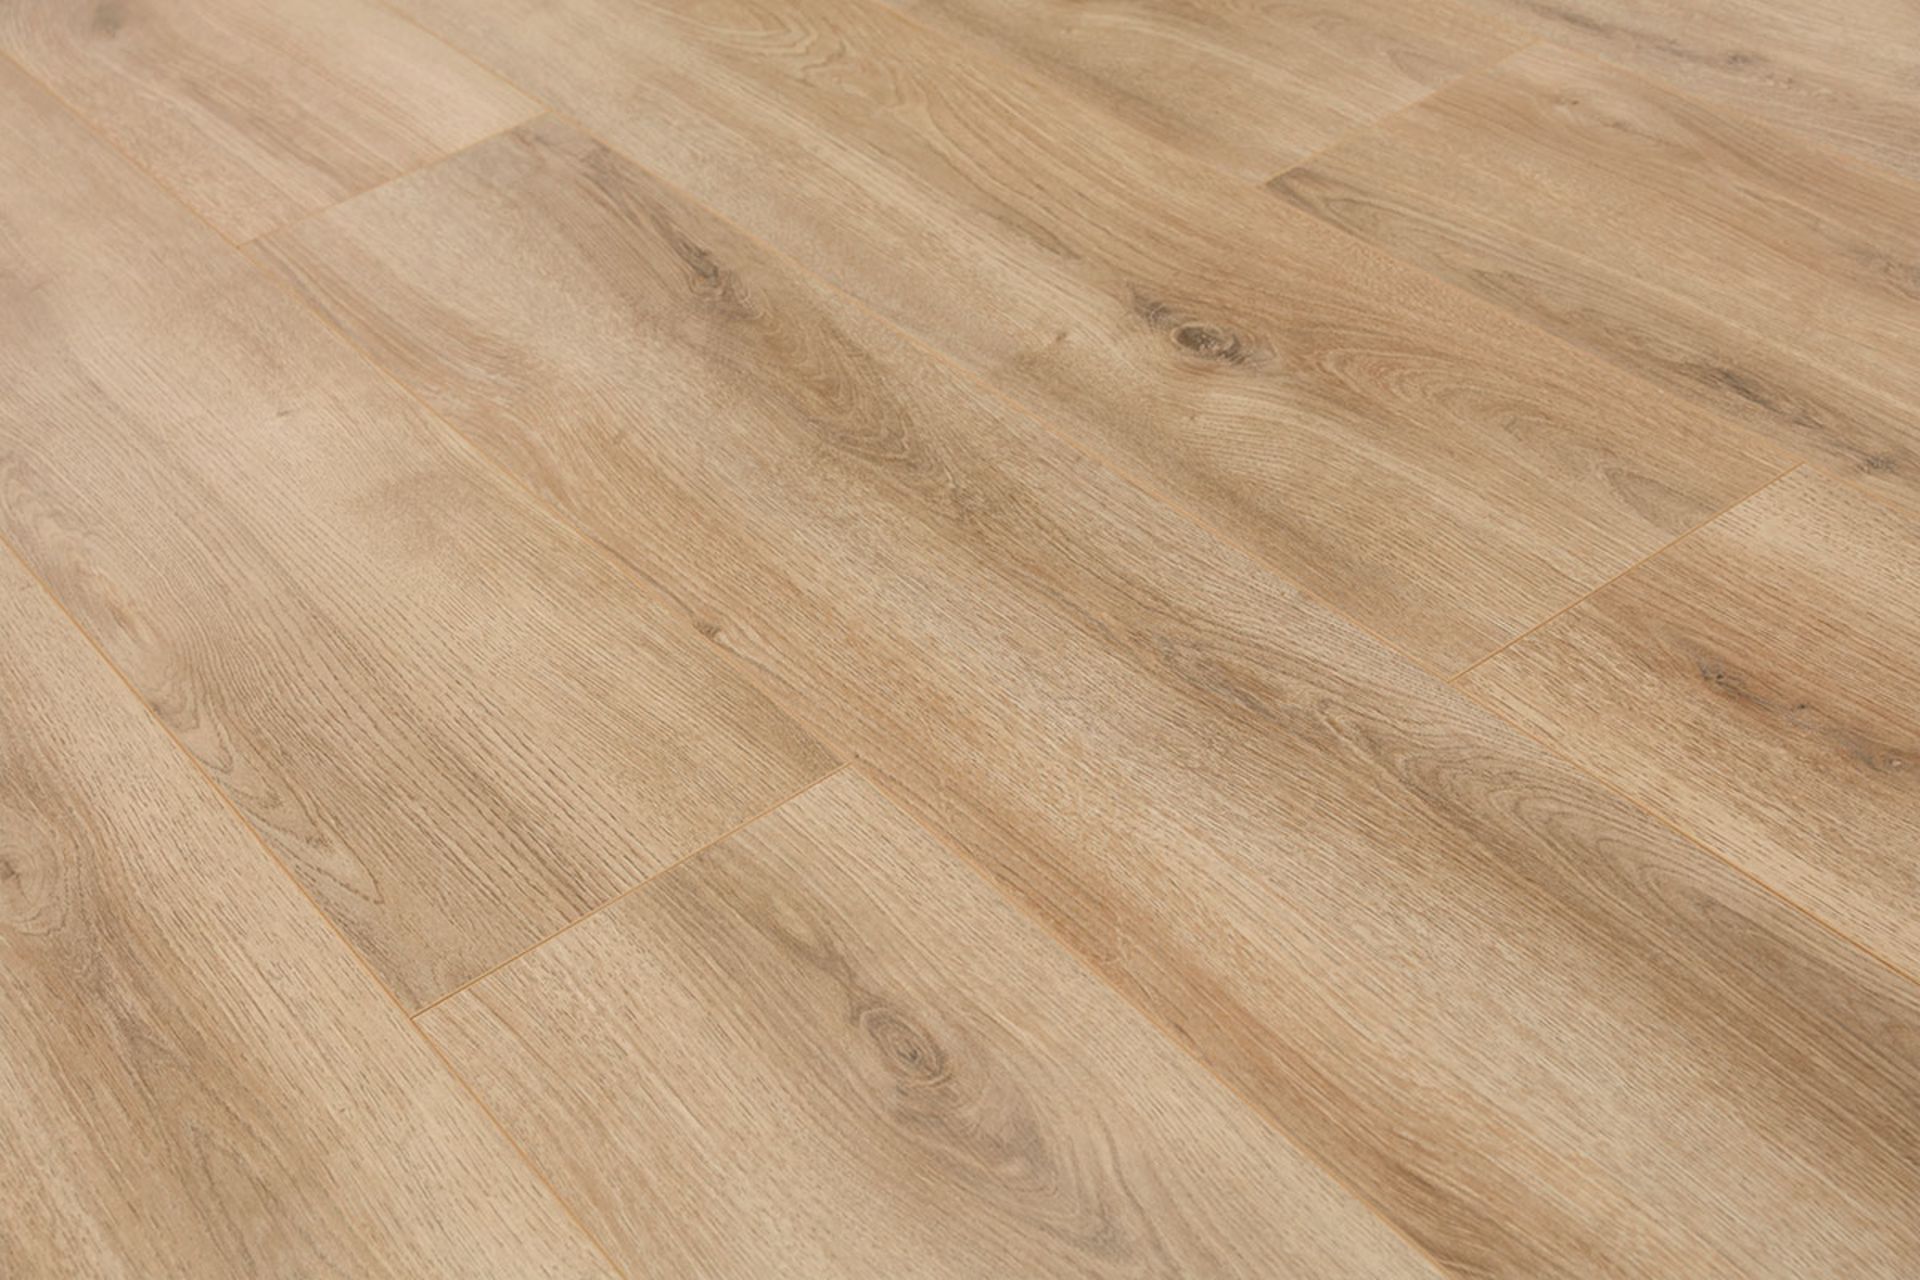 7.17 Square Meters of LAMINATE FLOORING SUMMER NATURAL OAK. With a warming natural oak tone, th... - Image 2 of 2